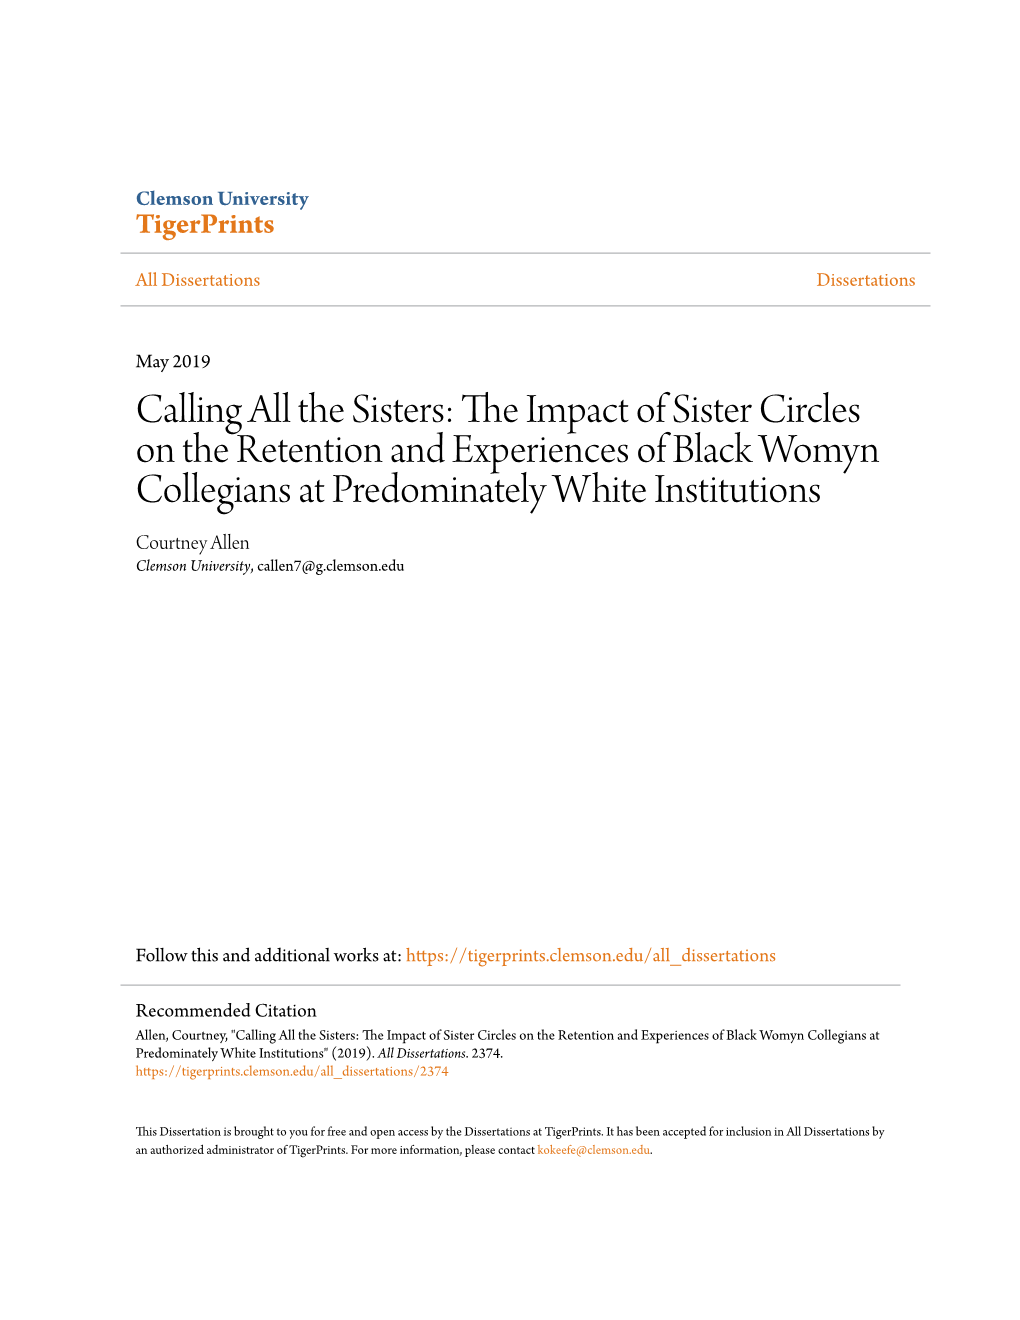 Calling All the Sisters: the Impact of Sister Circles on the Retention and Experiences of Black Womyn Collegians at Predominately White Institutions